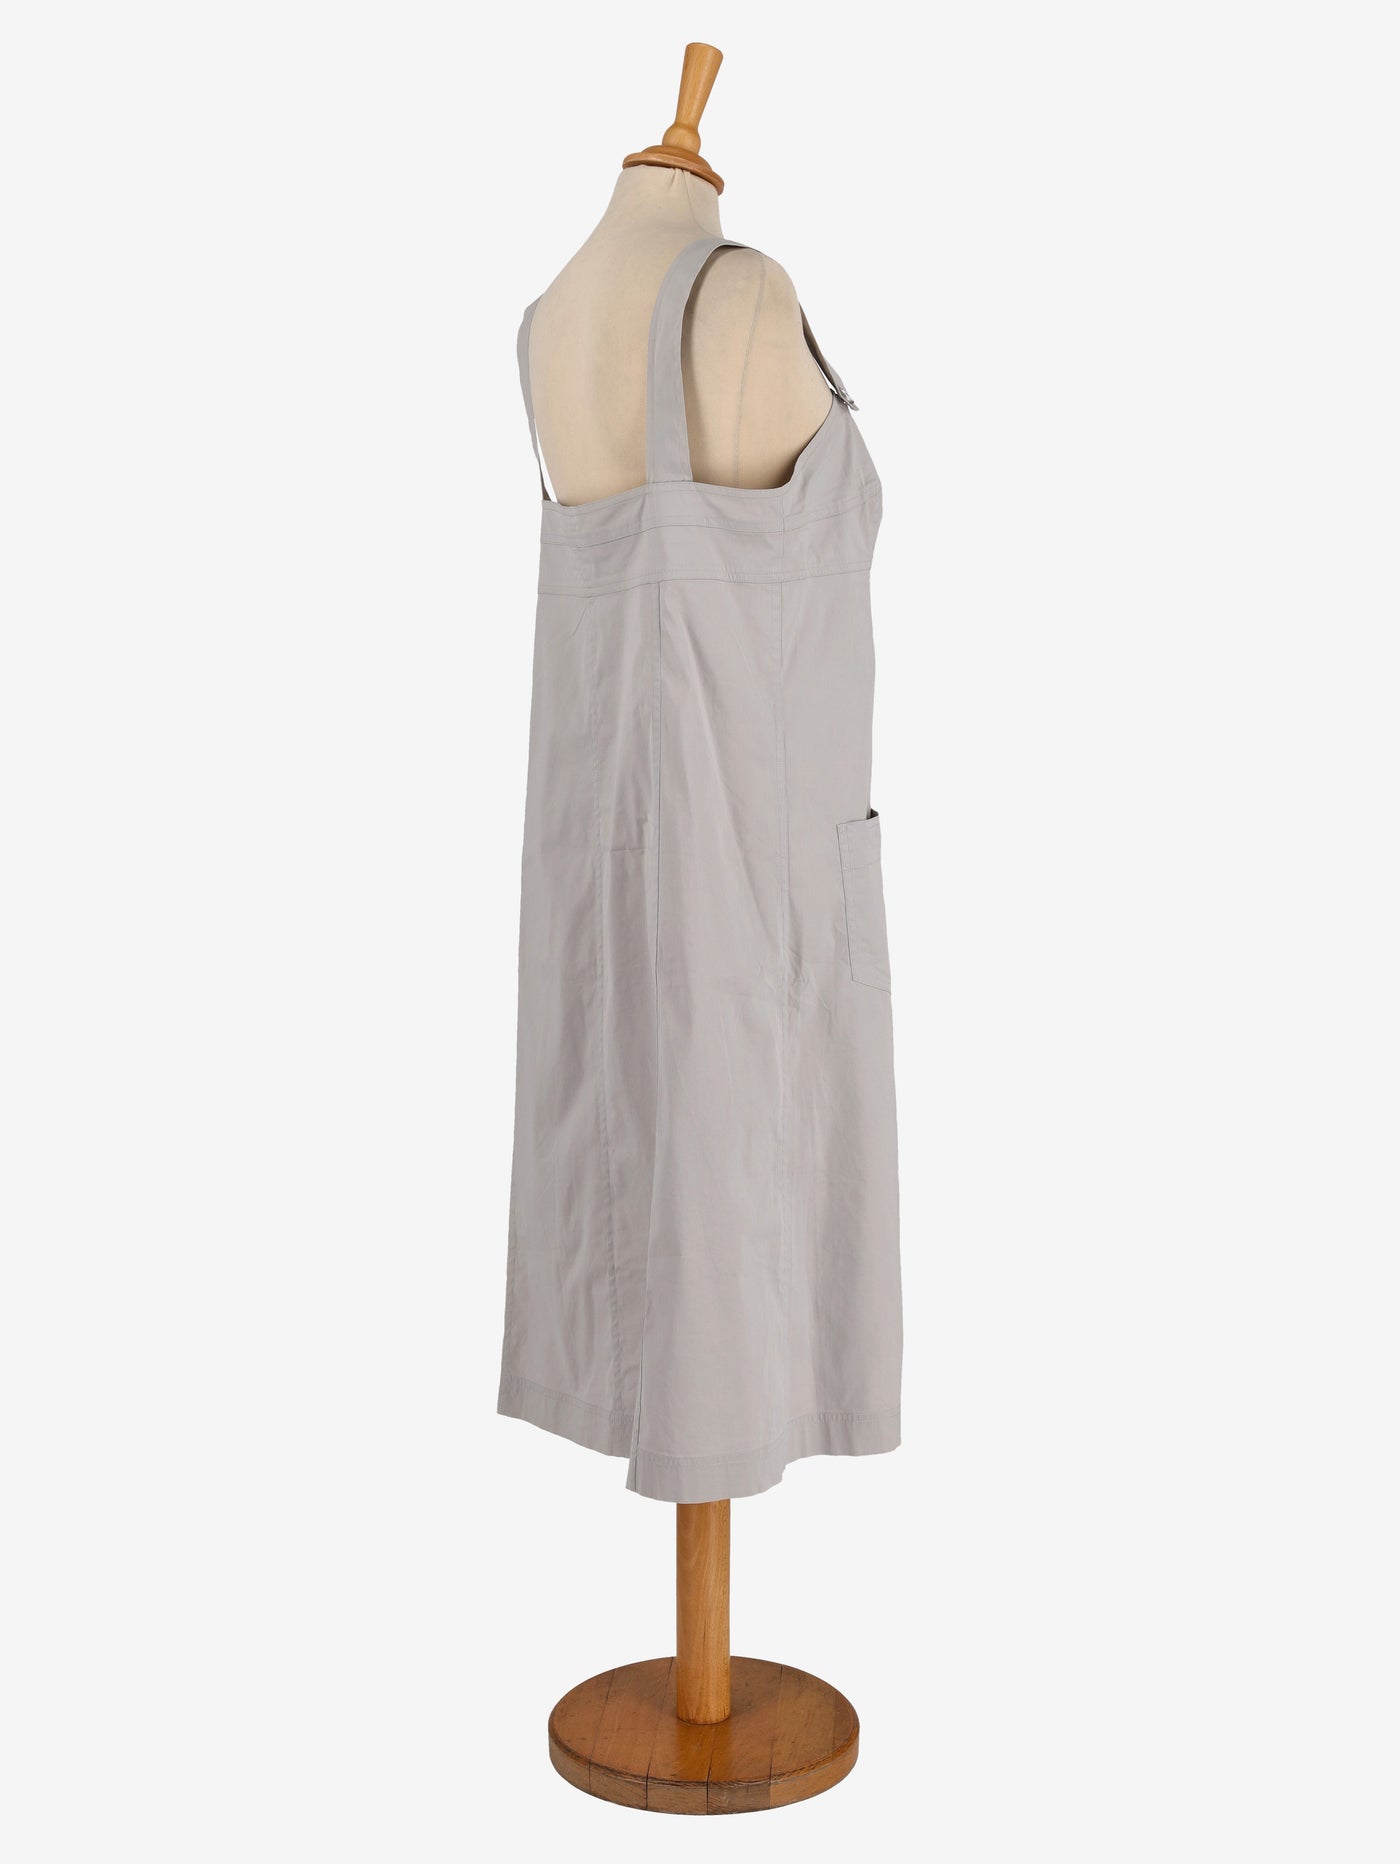 Chanel Dungarees  Dress - 00s